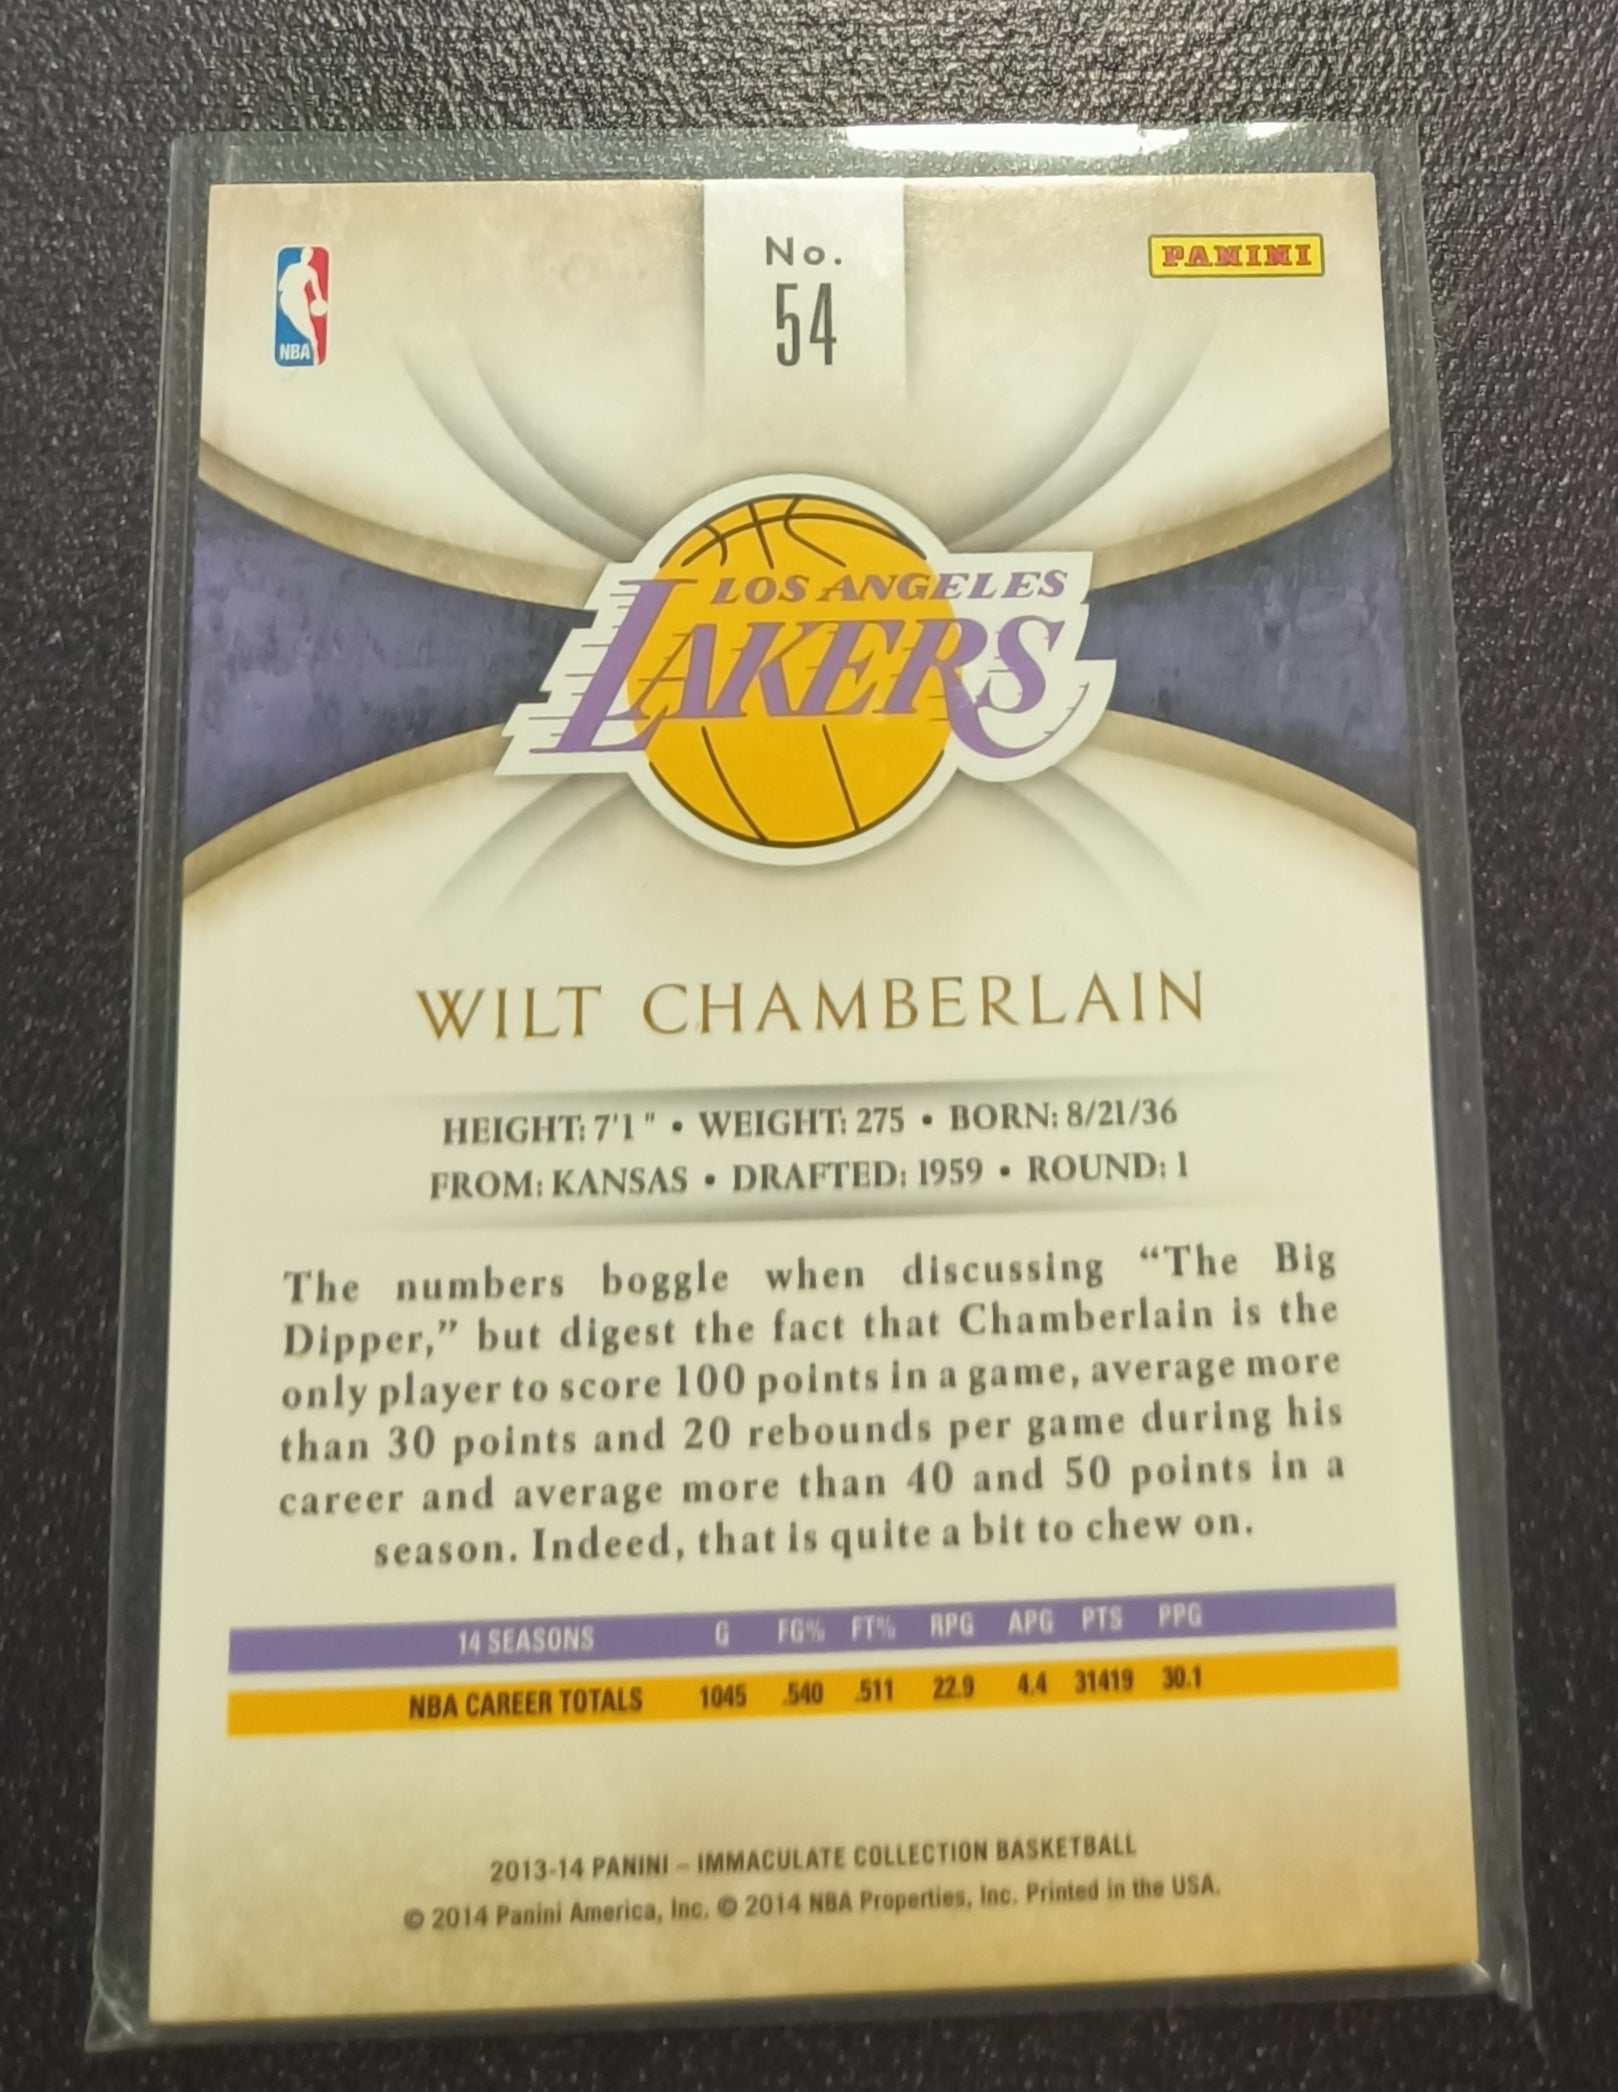 2012-13 Immaculate Collection #48 Wilt Chamberlain /99 -